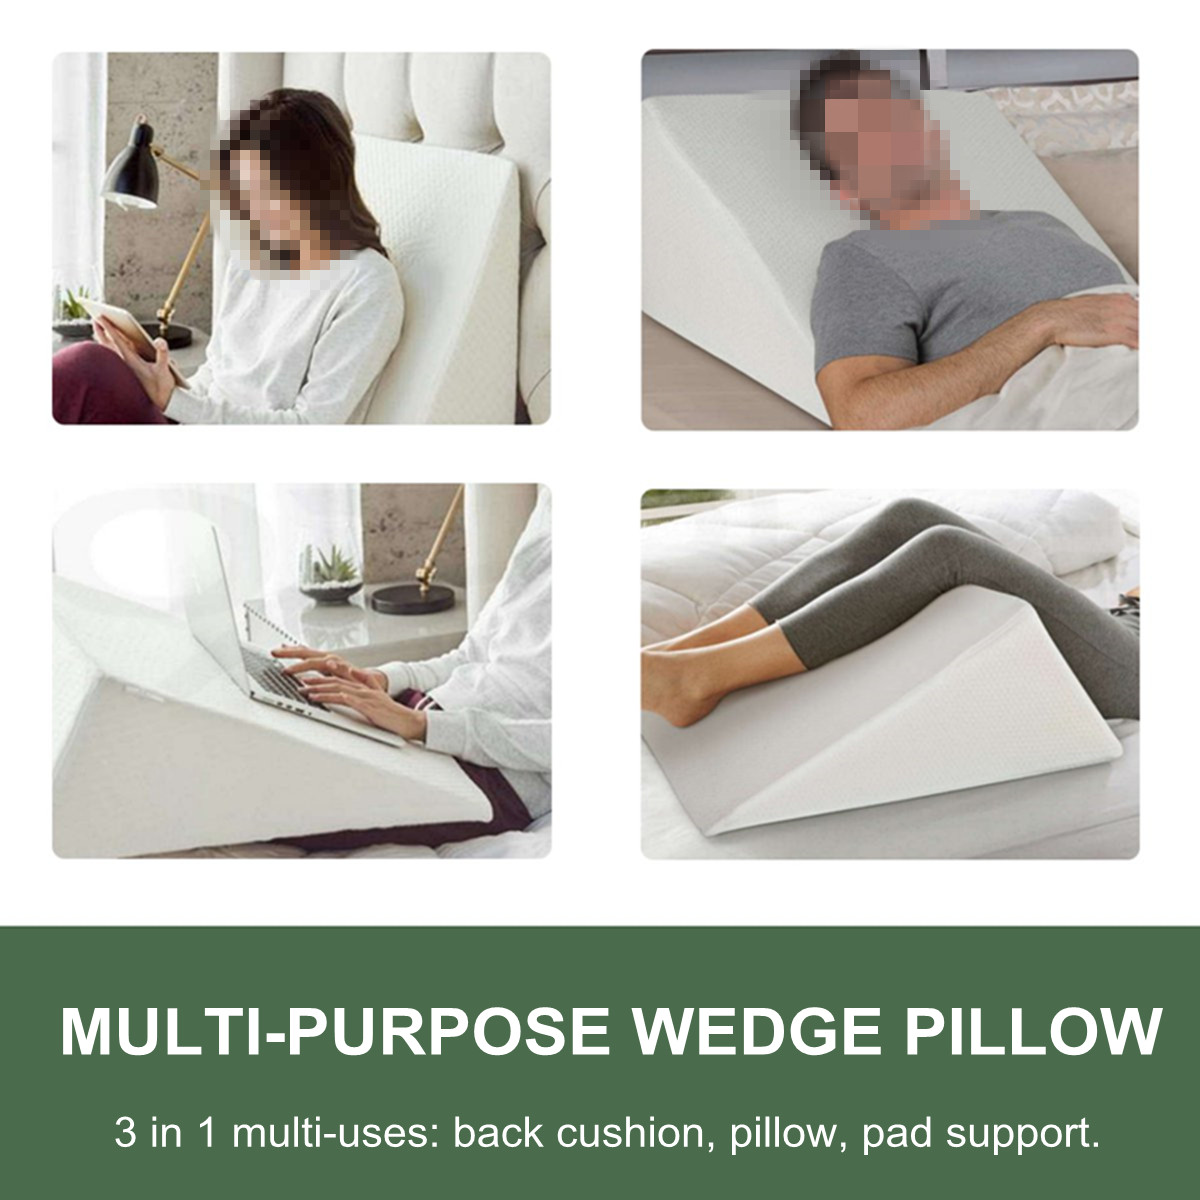 Memory-Foam-Orthopedic-Acid-Reflux-Bed-Wedge-Pillow-Back-Leg-Elevation-Cushion-Support-Cover-Pad-1361893